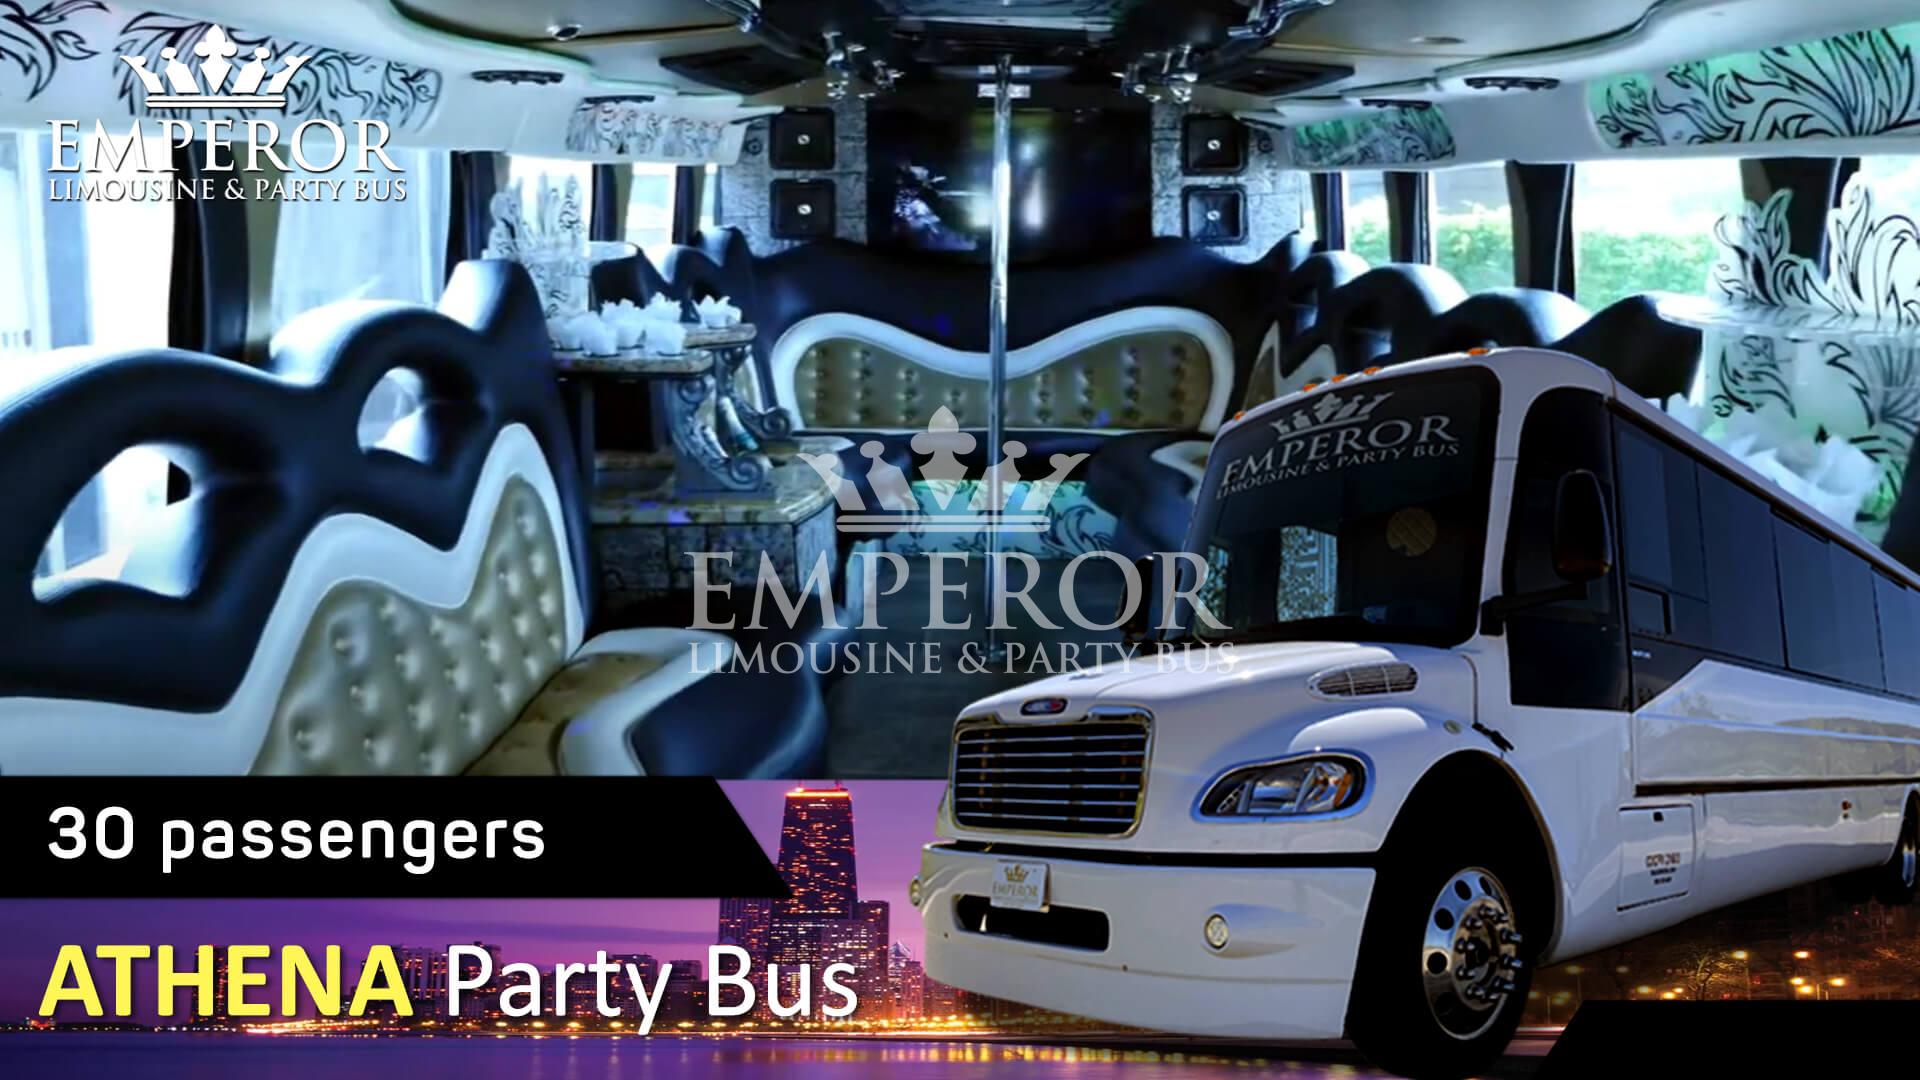 Party bus rental service in Arlington Heights - Athena Edition